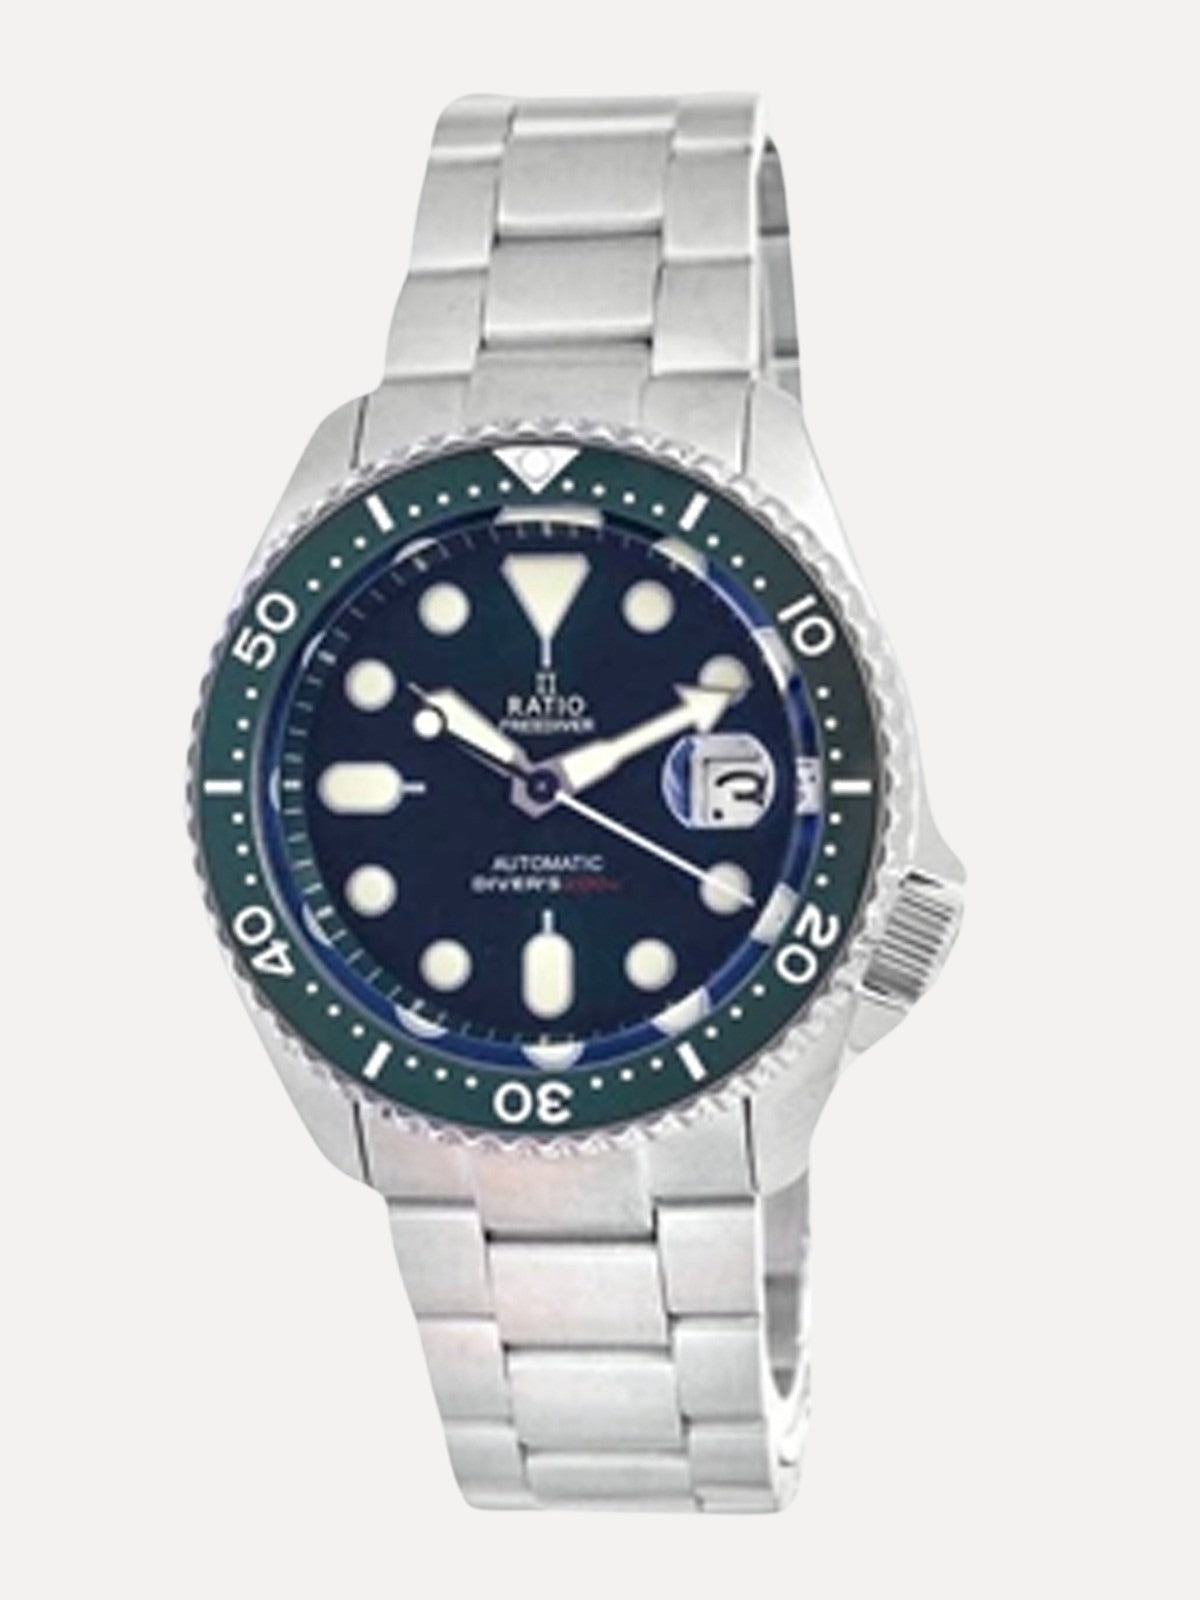 Ratio FreeDiver Green Dial Sapphire Crystal Stainless Steel Automatic RTB205 200M Mens Watch